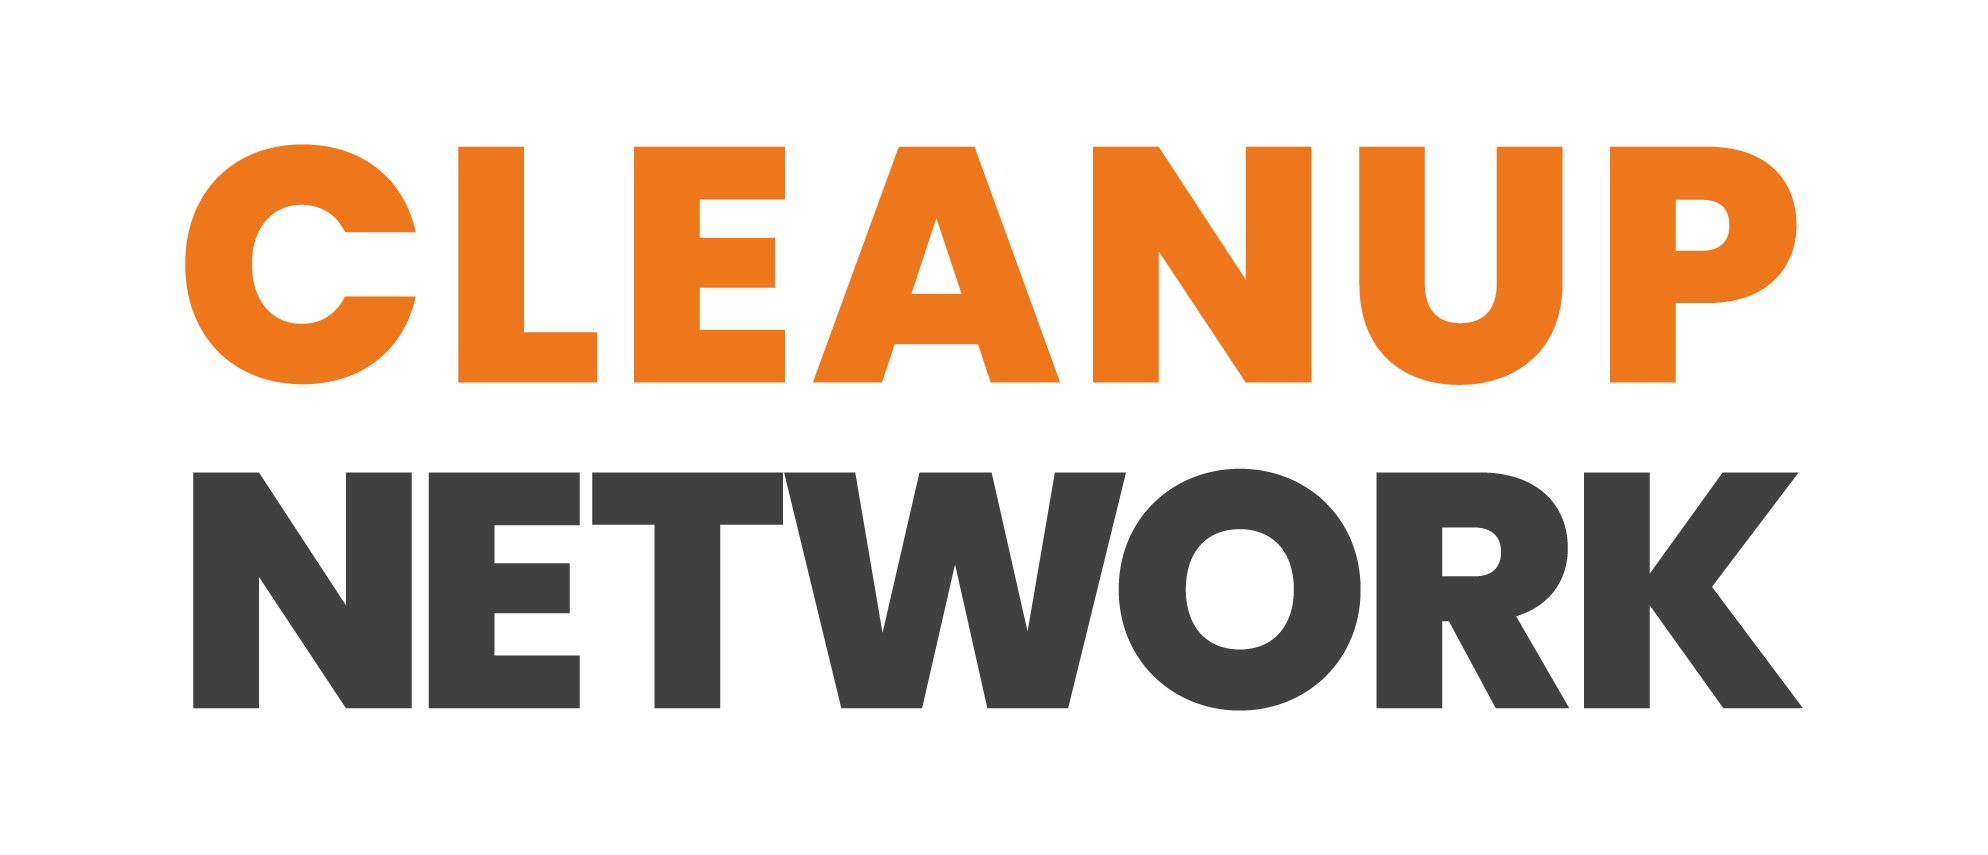 Cleanup Network